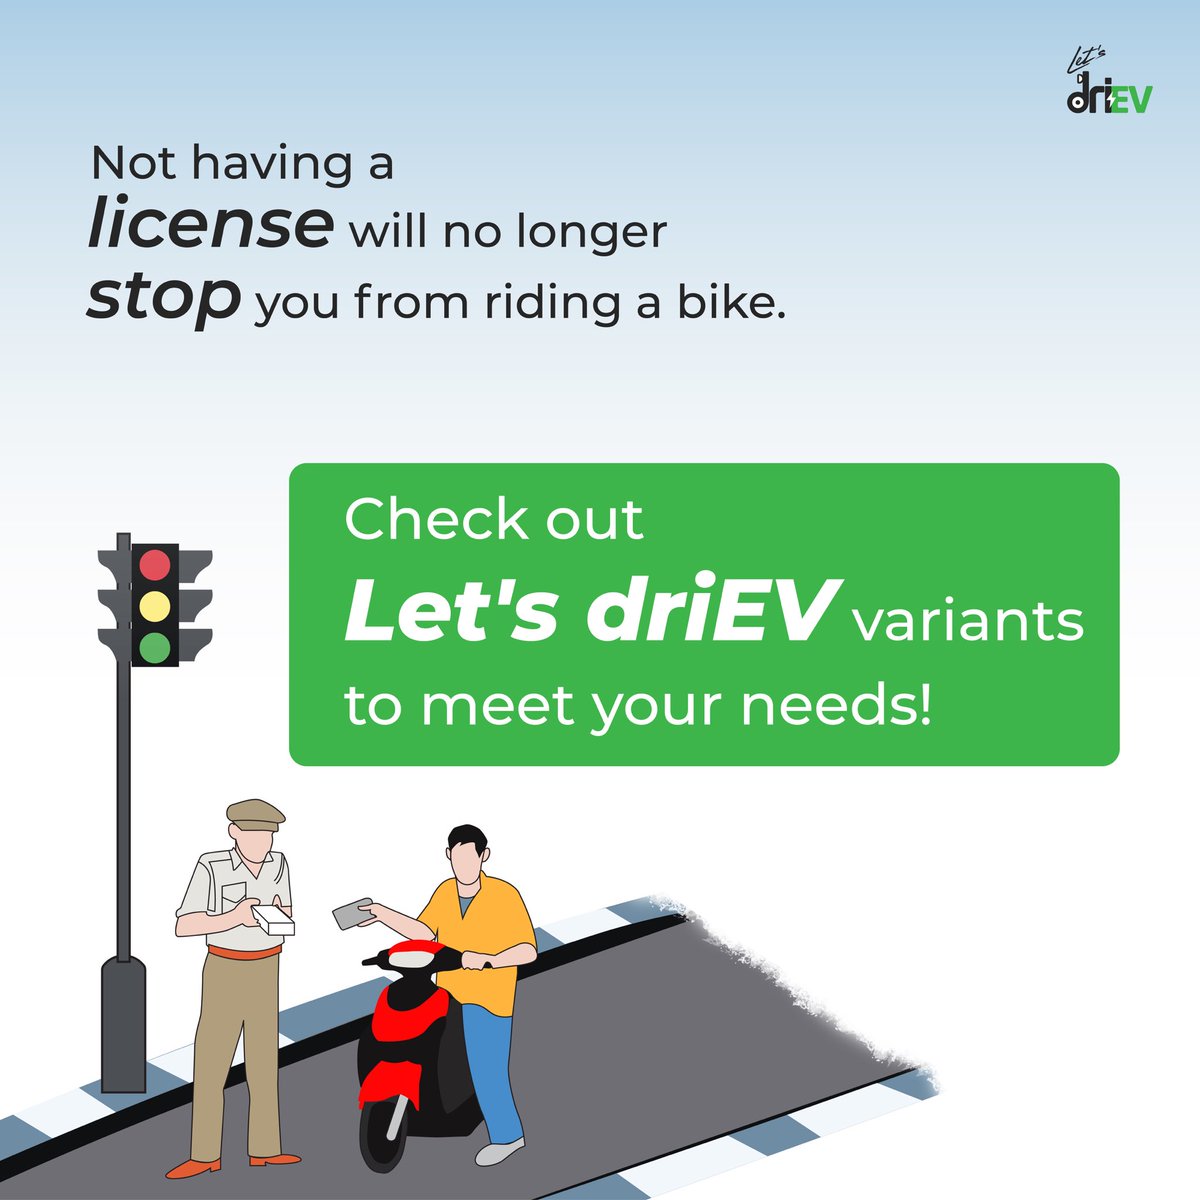 You can pick from our different variants according to your convenience. Please note that you can book a low speed variant without a license. 

Book Let’s driEV now - driev.bike

#BikeBooking #BikeRentals #BikeinBhubaneswar